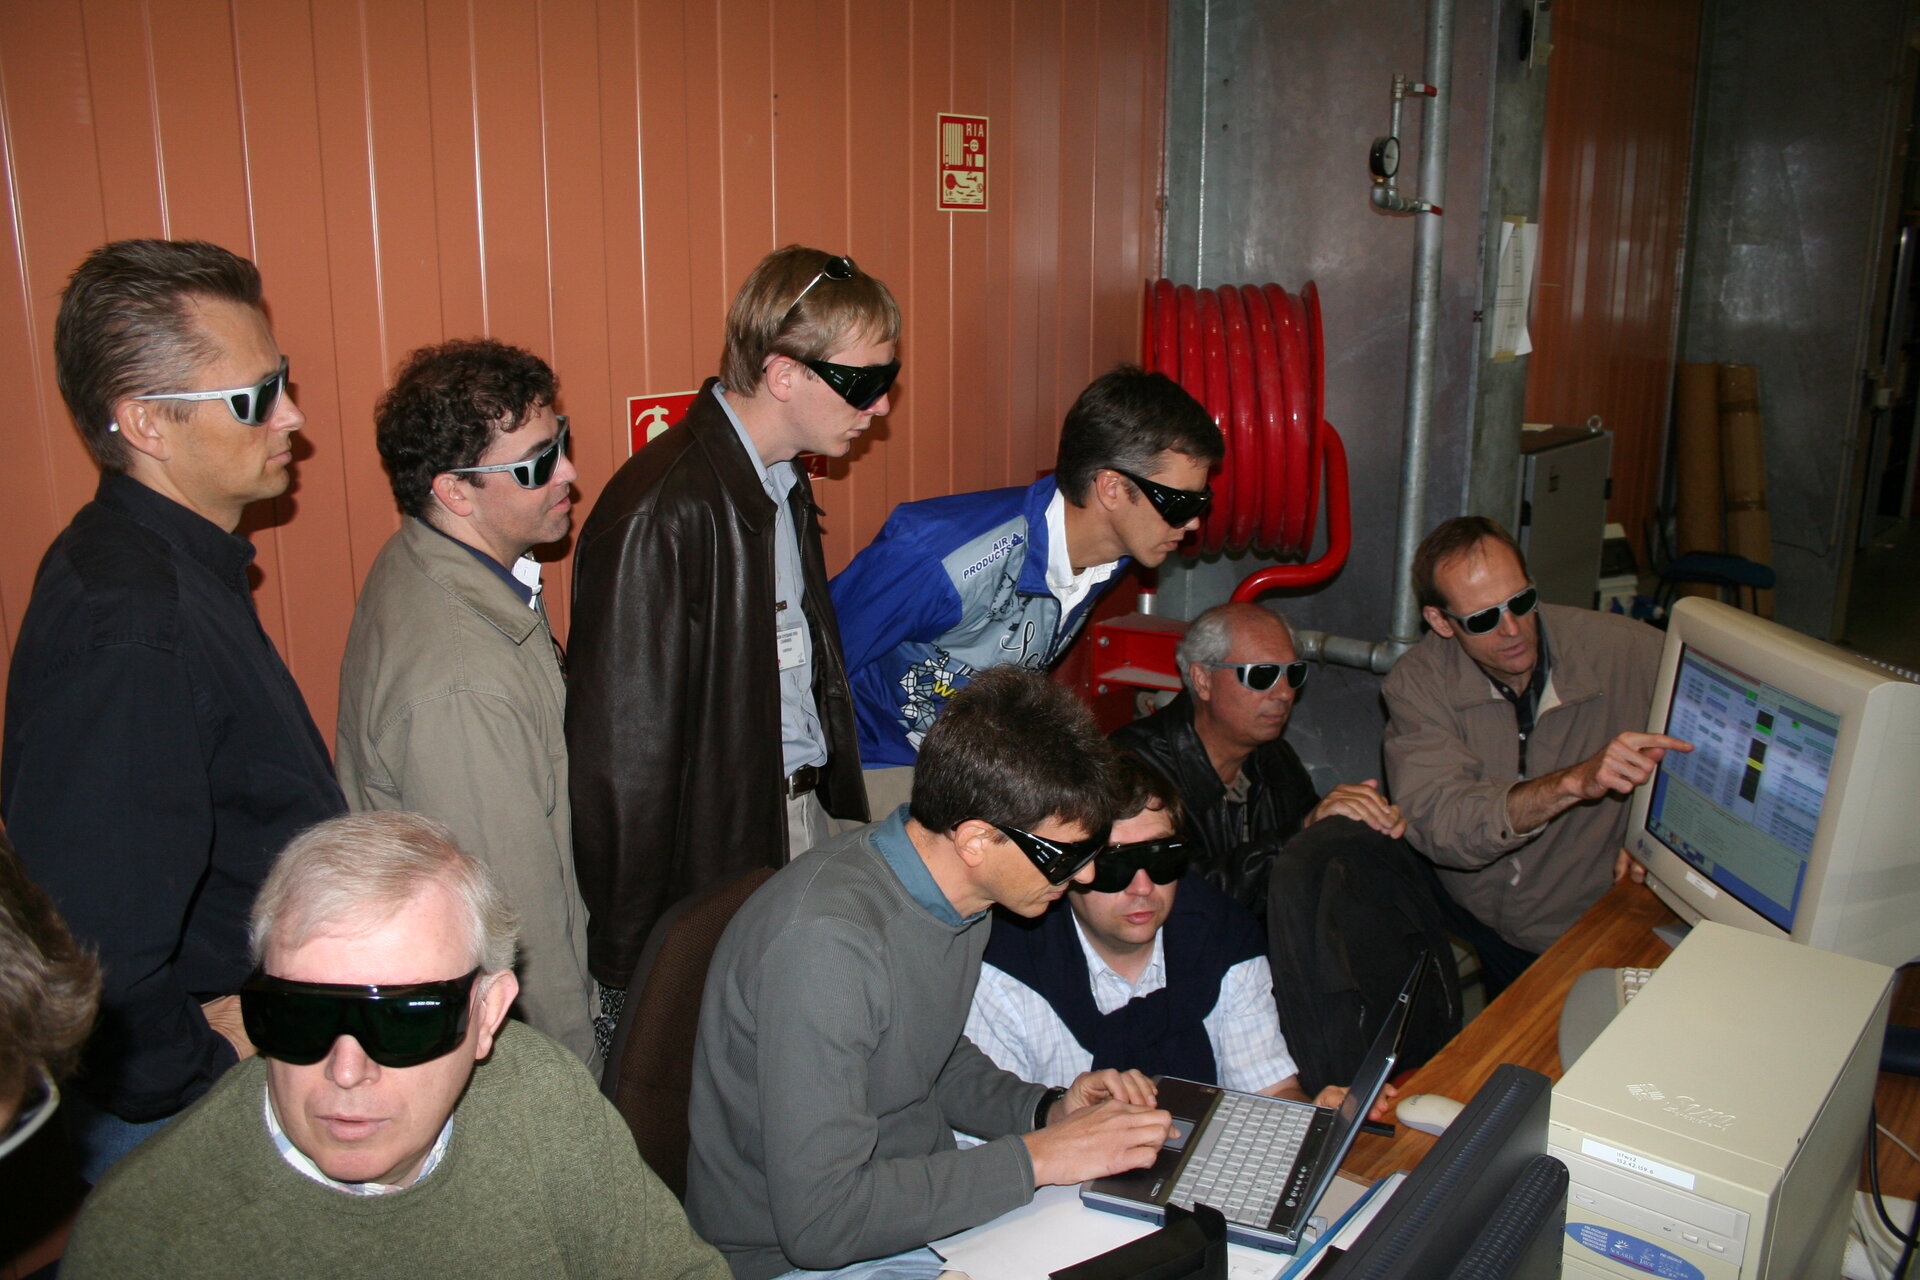 NASA engineers witness the full rendezvous simulation at Val de Reuil